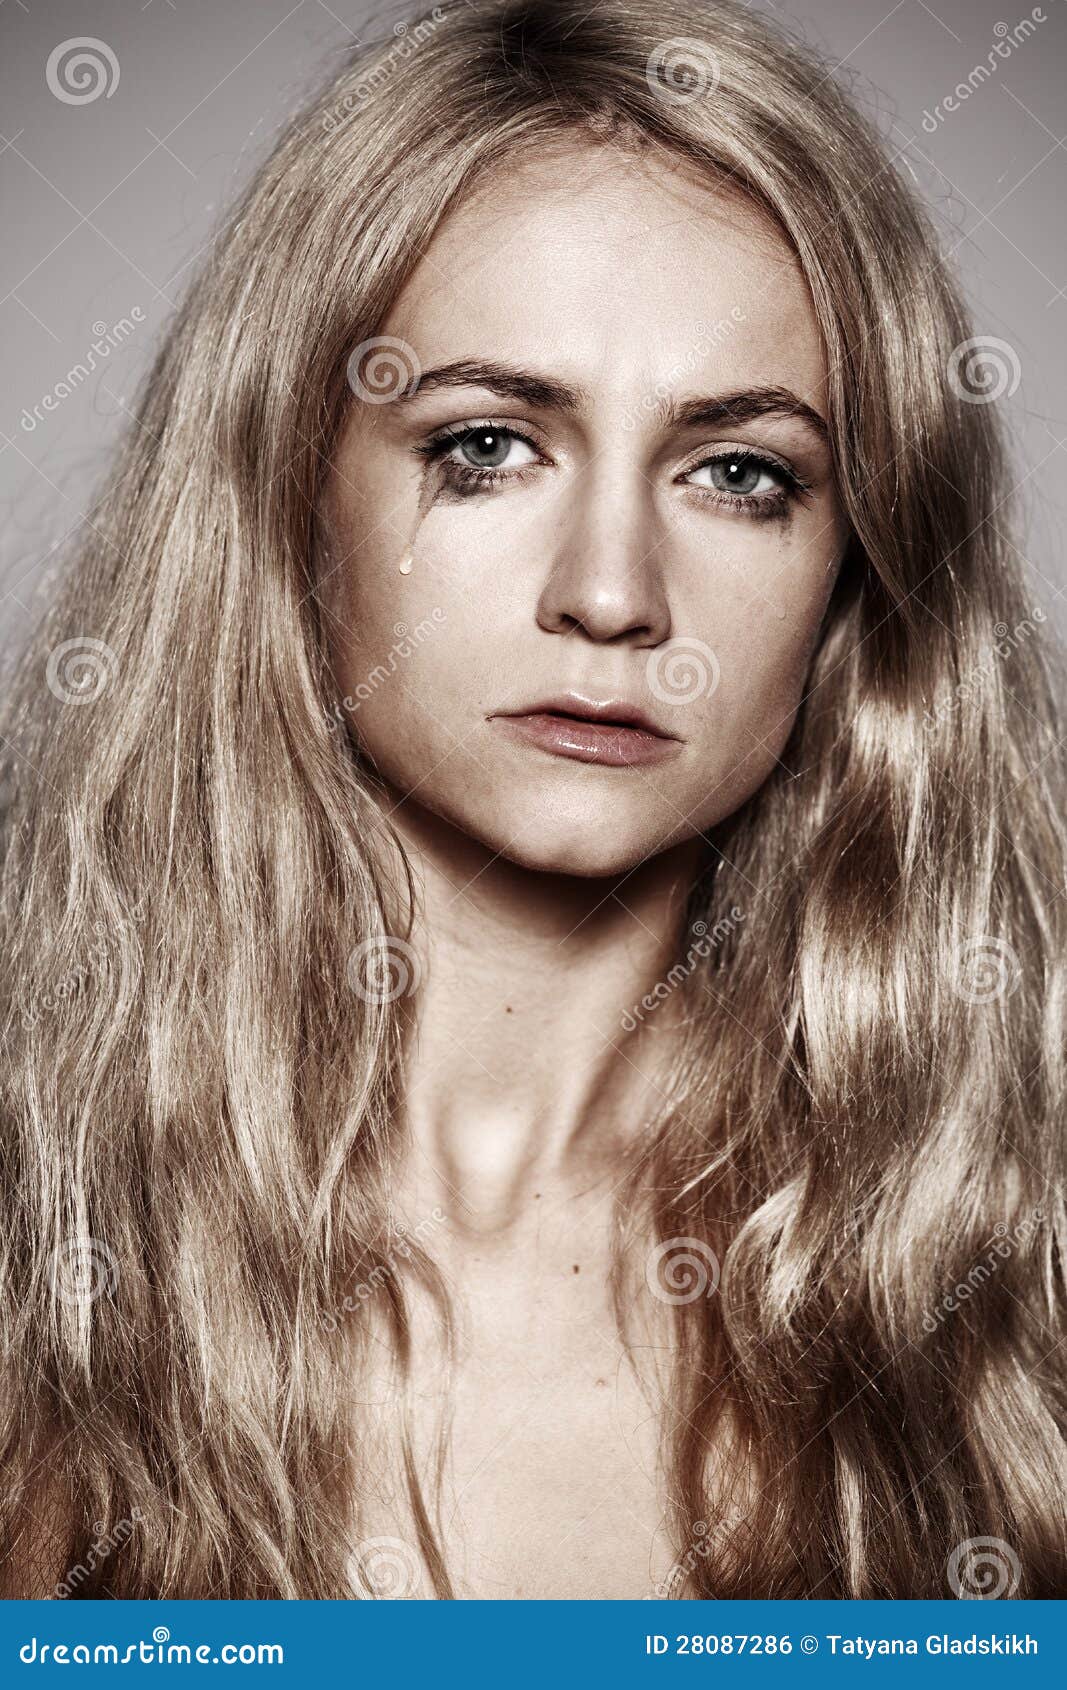 Sad Woman With Tears In Her Eyes Royalty Free Stock Image 